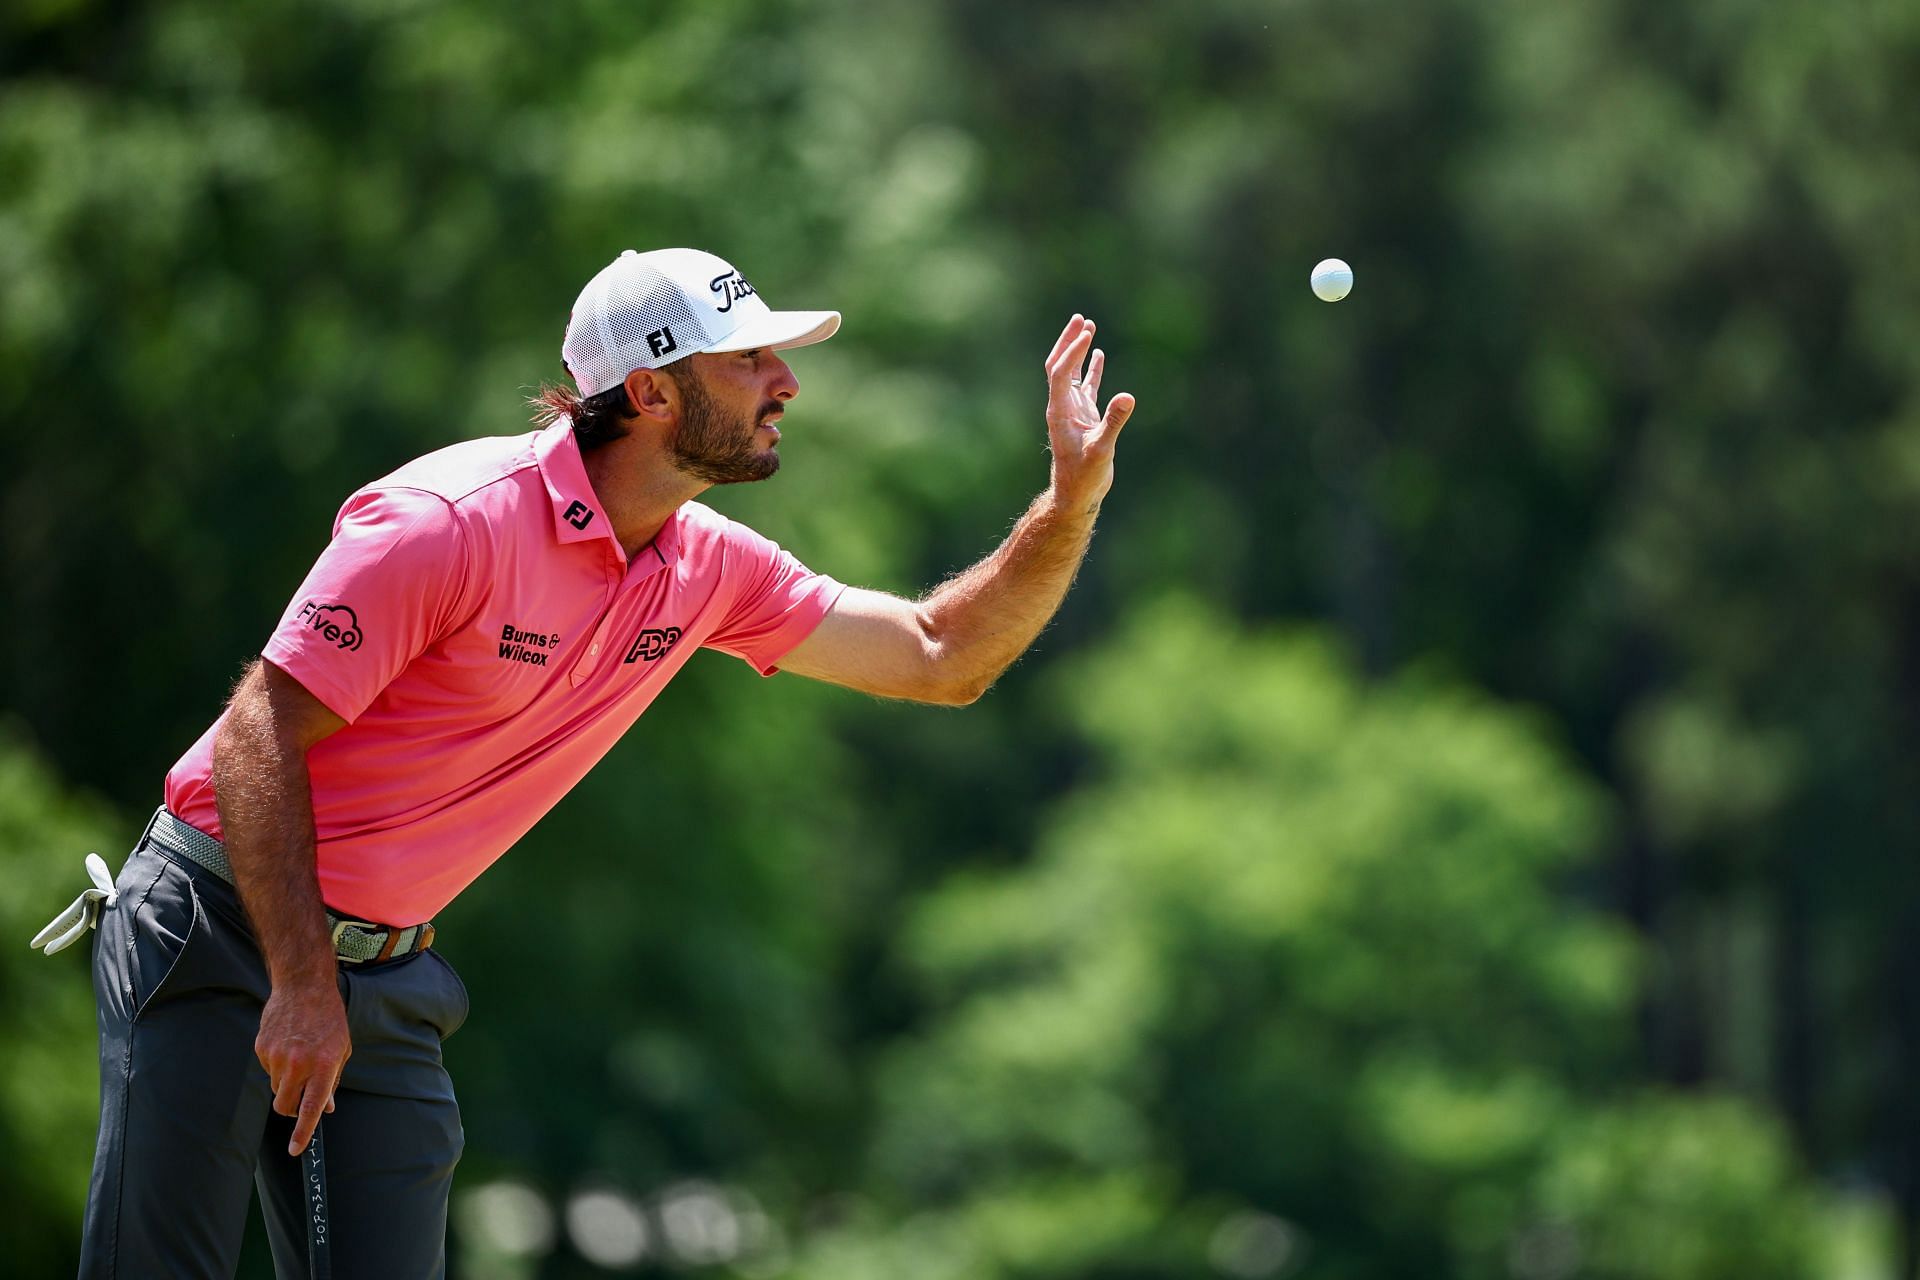 Max Homa had a good outing at the Wells Fargo Championship